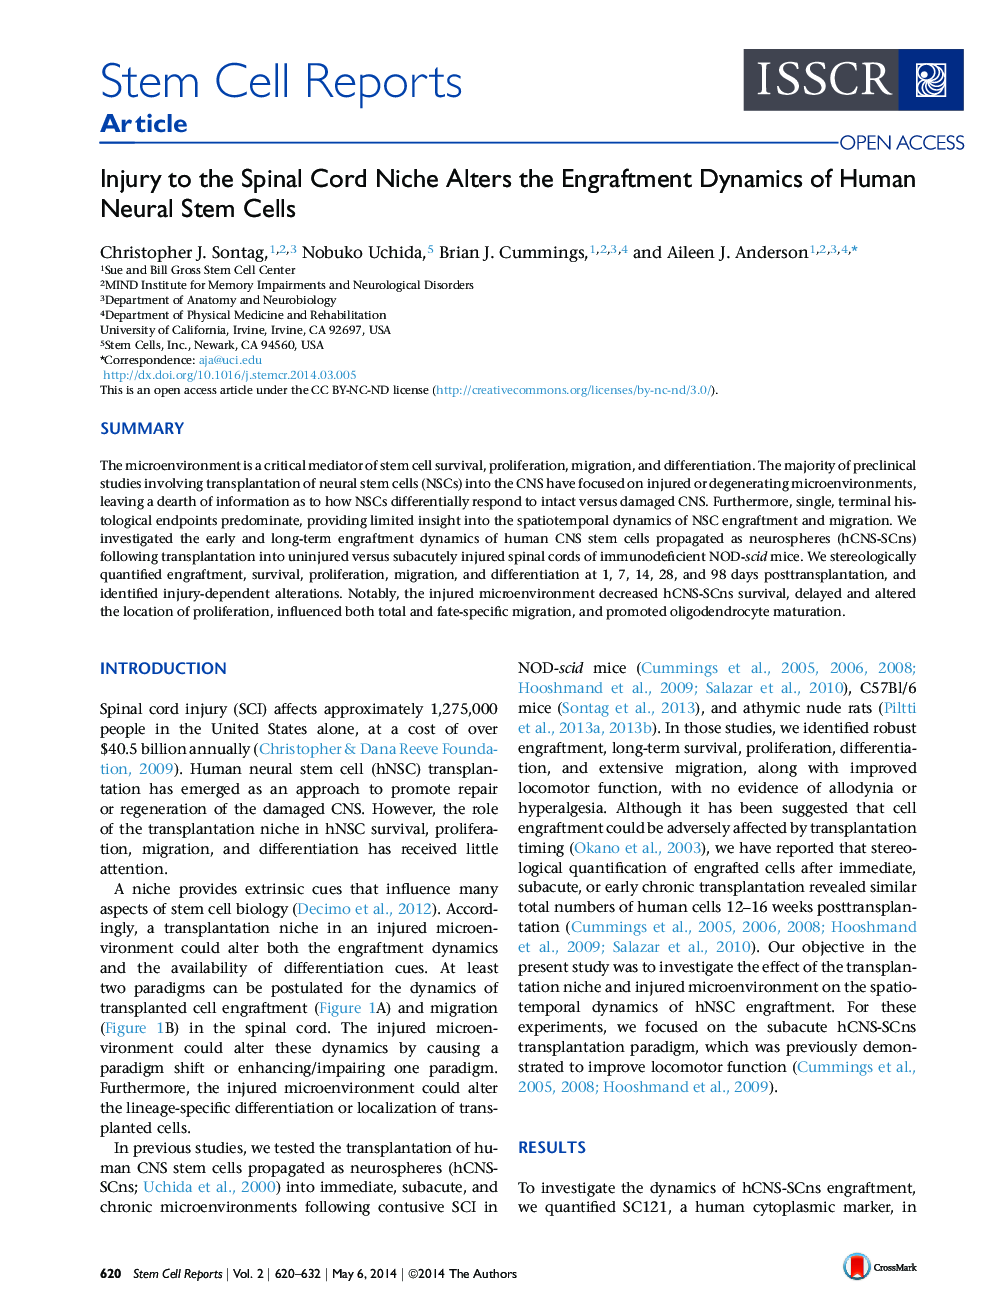 Injury to the Spinal Cord Niche Alters the Engraftment Dynamics of Human Neural Stem Cells 